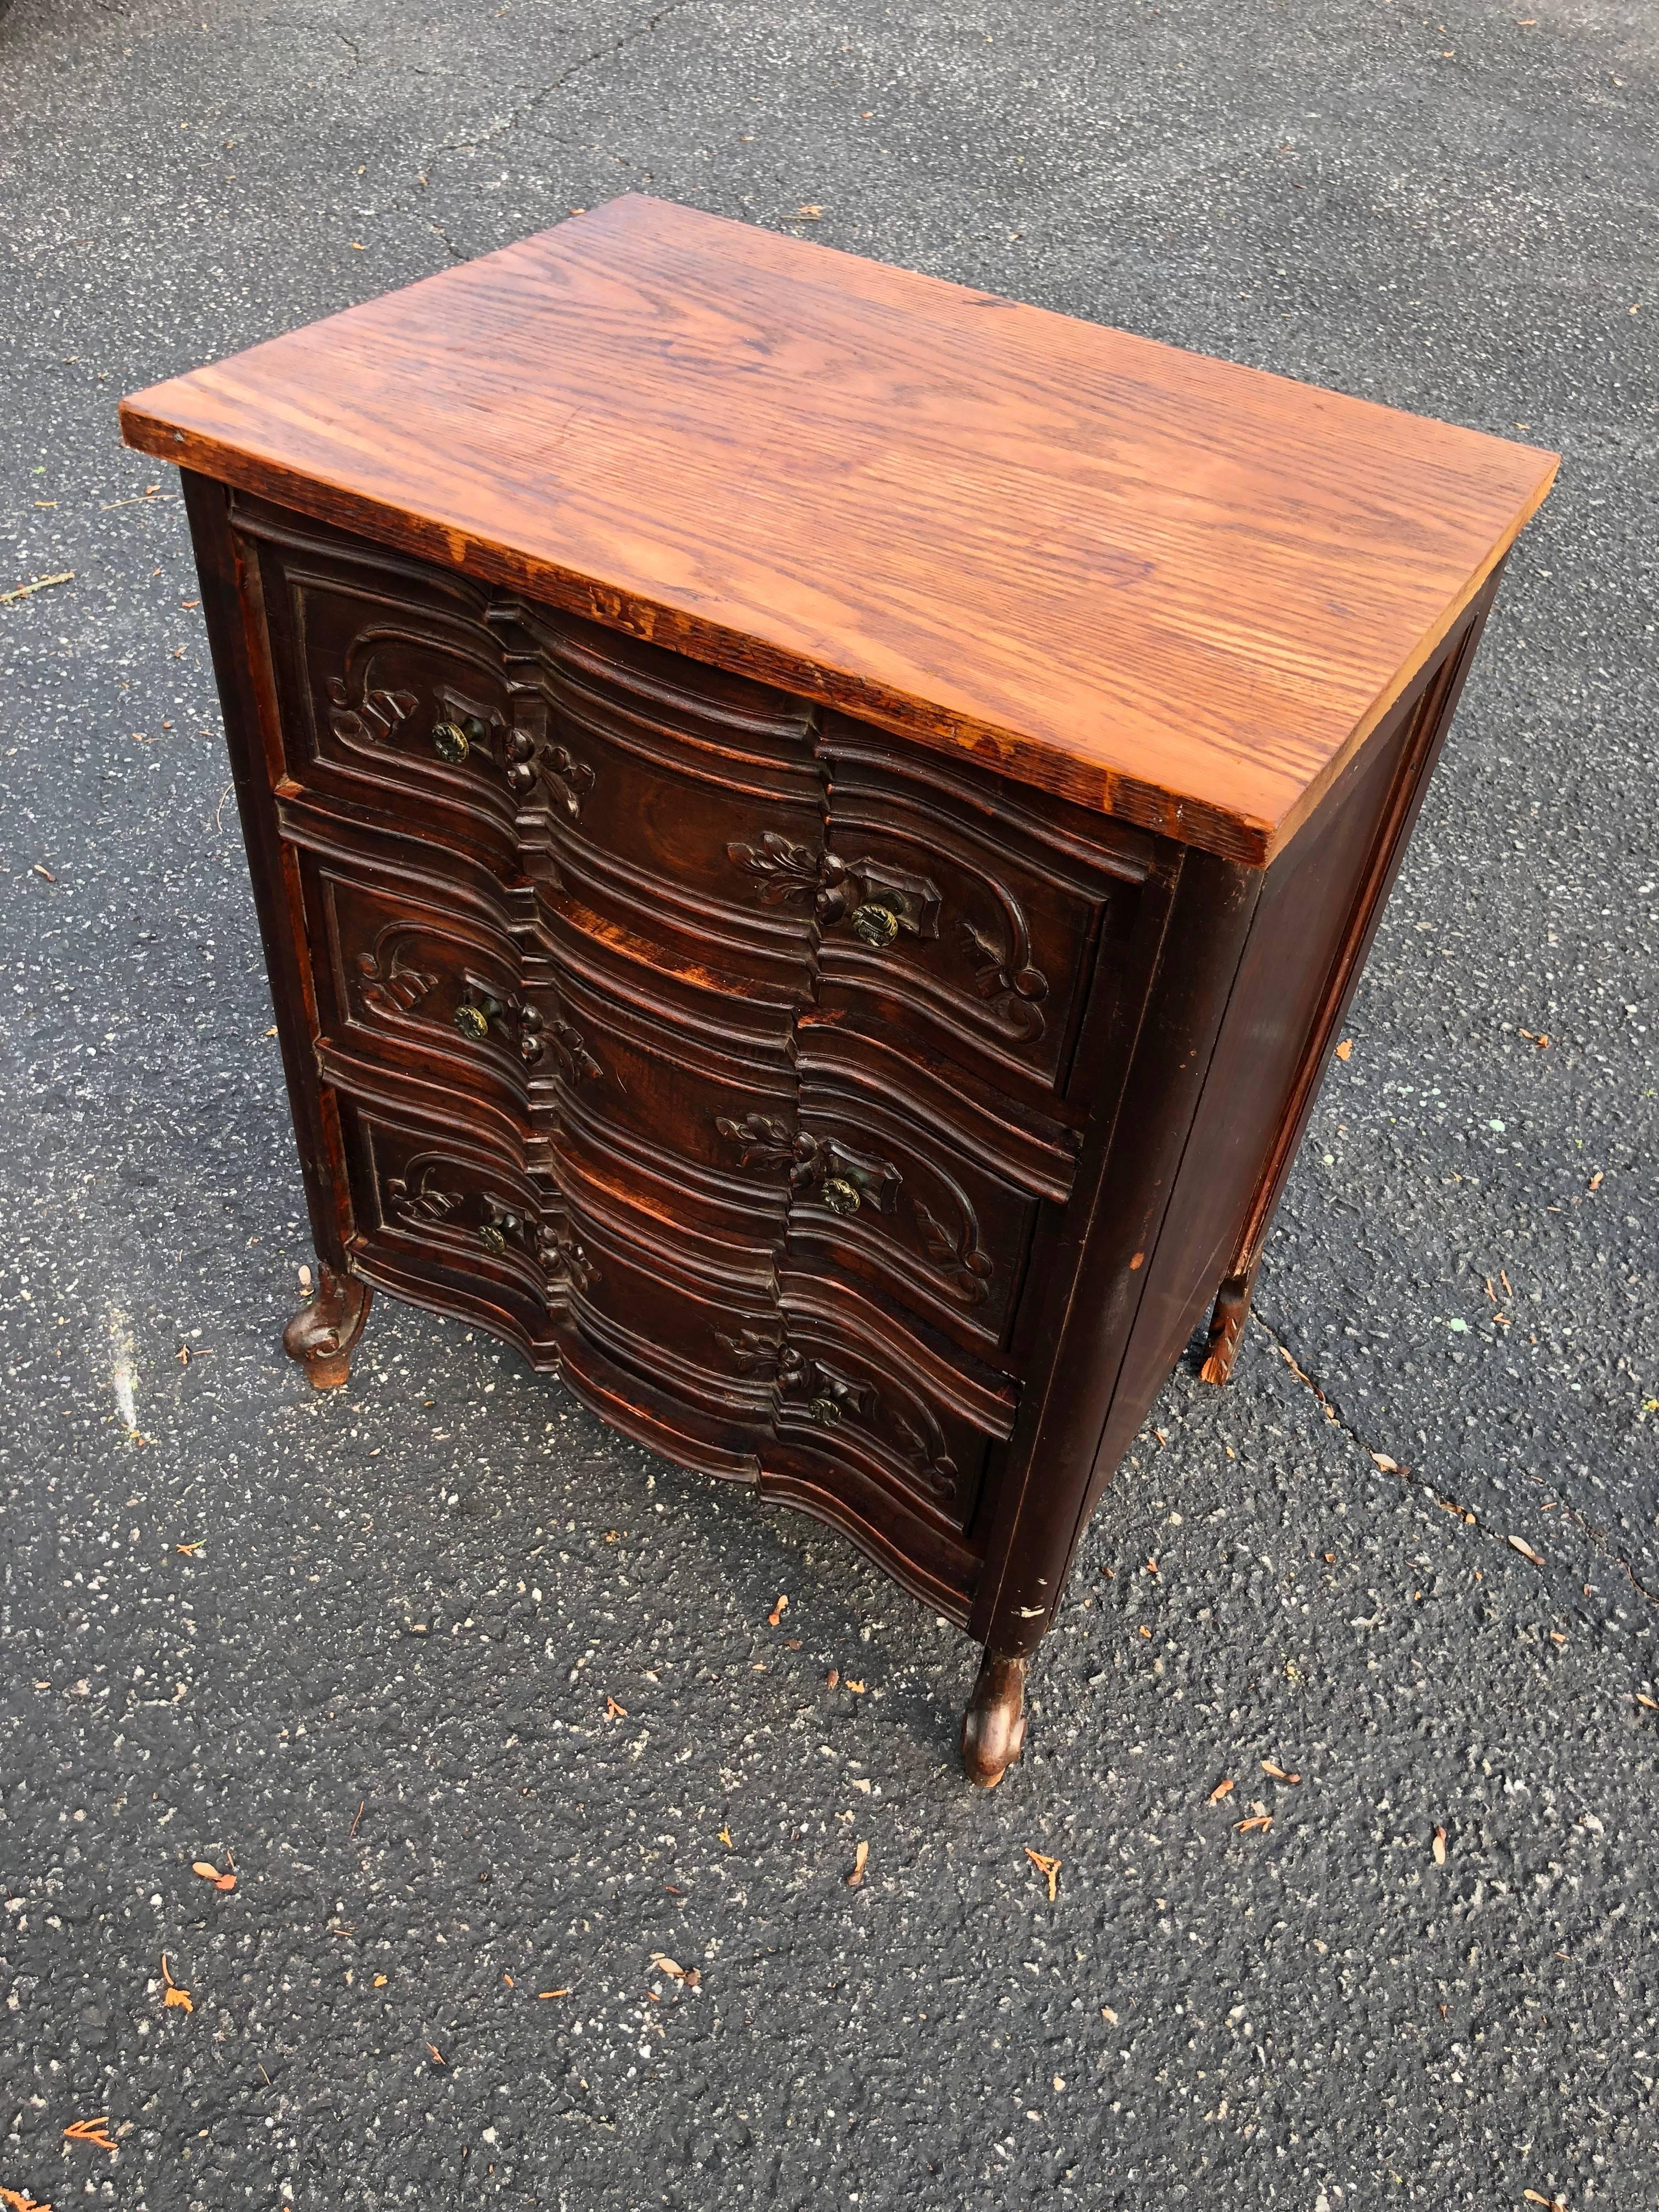 Carved Front Three-Drawer Chest. The solid oak top has been married to the base and the feet may not be original. Distressed, but all in all a pretty piece. This would make a sweet nightstand or side table. 